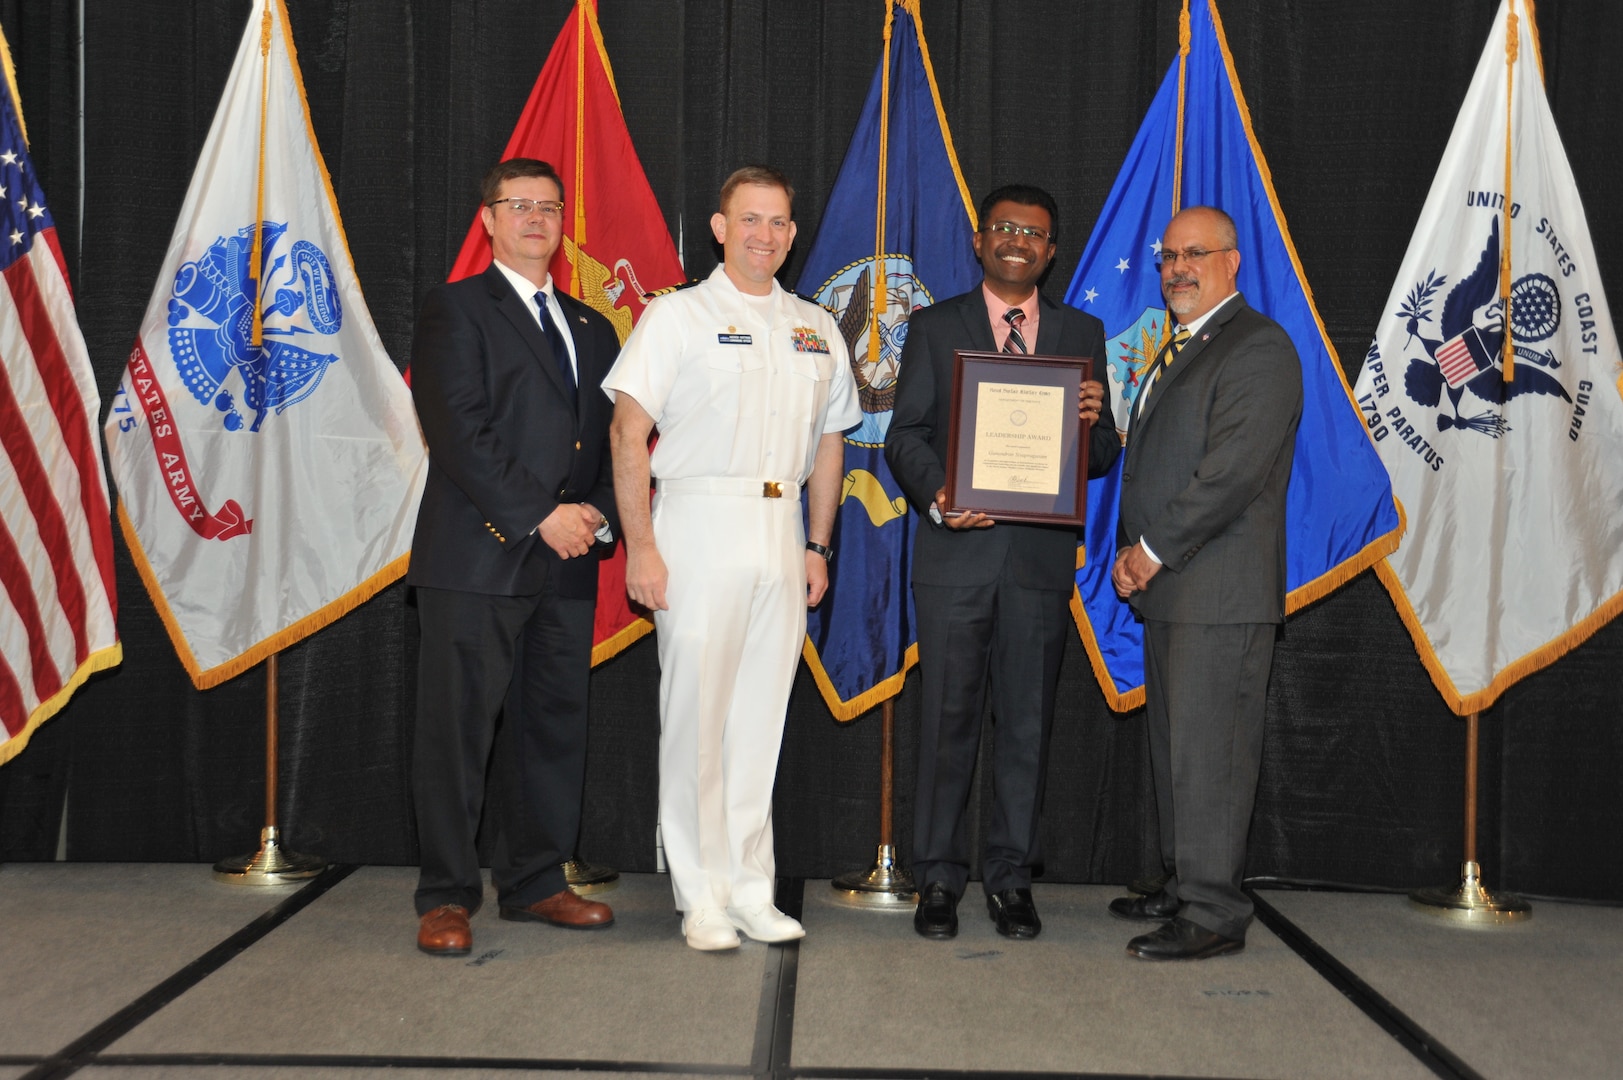 IMAGE: Gunendran Sivapragasam  is presented the Leadership Award at Naval Surface Warfare Center Dahlgren Division's annual awards ceremony, Apr. 26 at the Fredericksburg Expo and Conference Center.